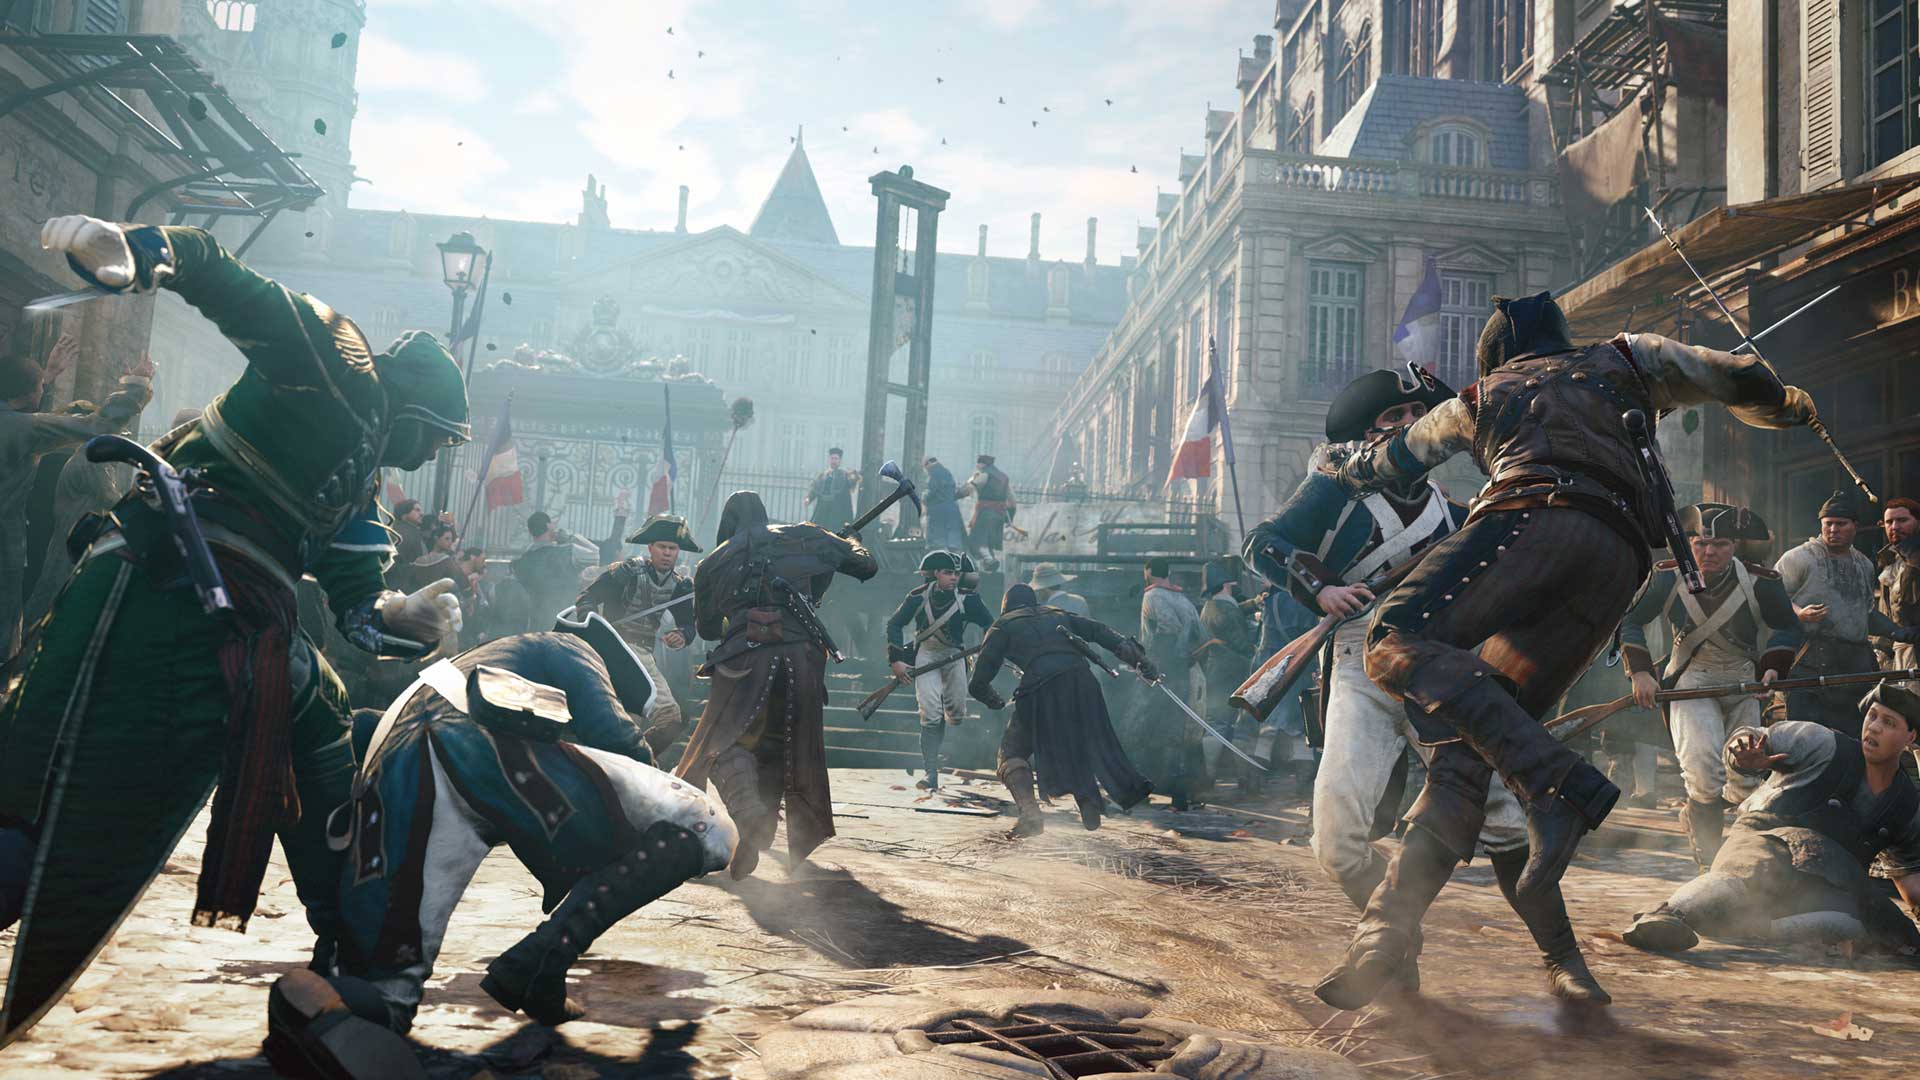 Assassin's Creed: Unity (Единство) – Collector's Edition / Guillotine Edition